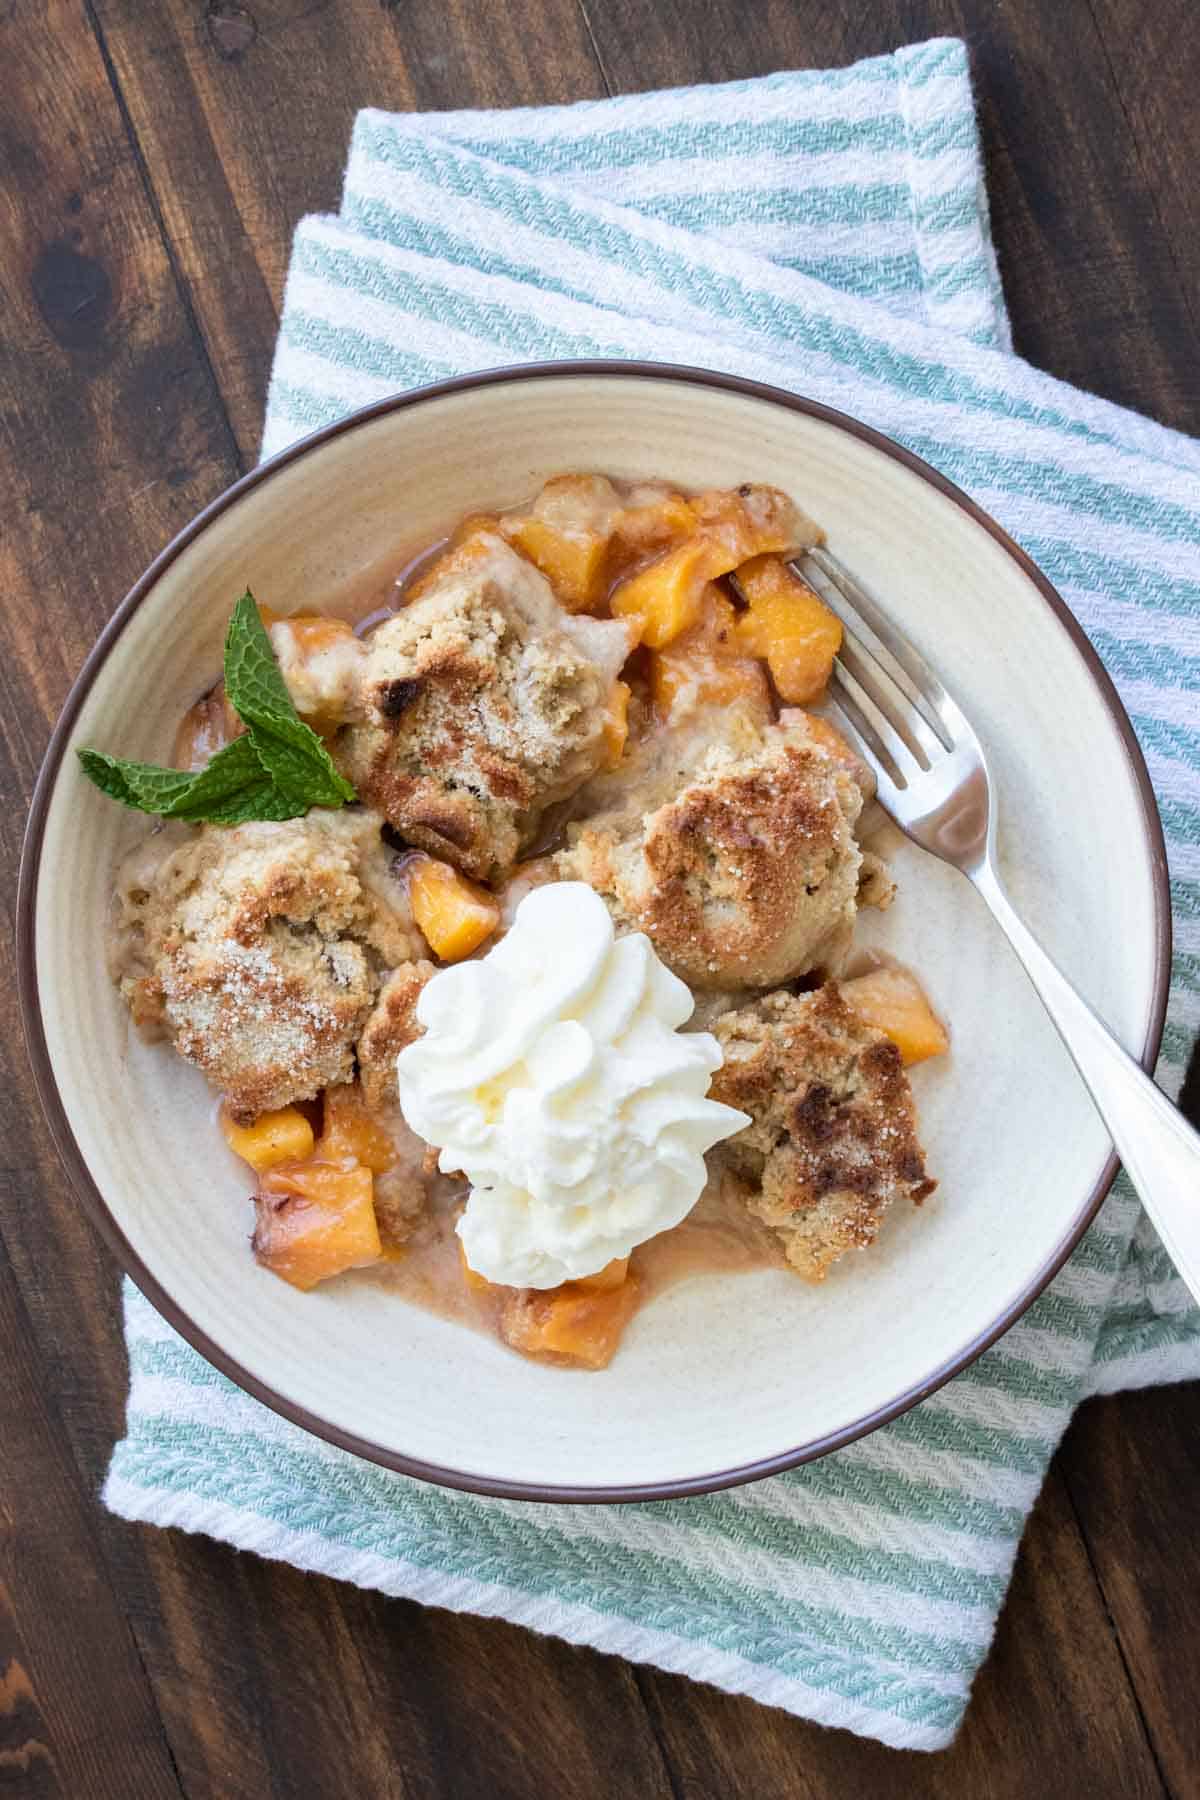 Peach cobbler with a fork and topped with whipped cream and a mint leaf in a cream bowl.